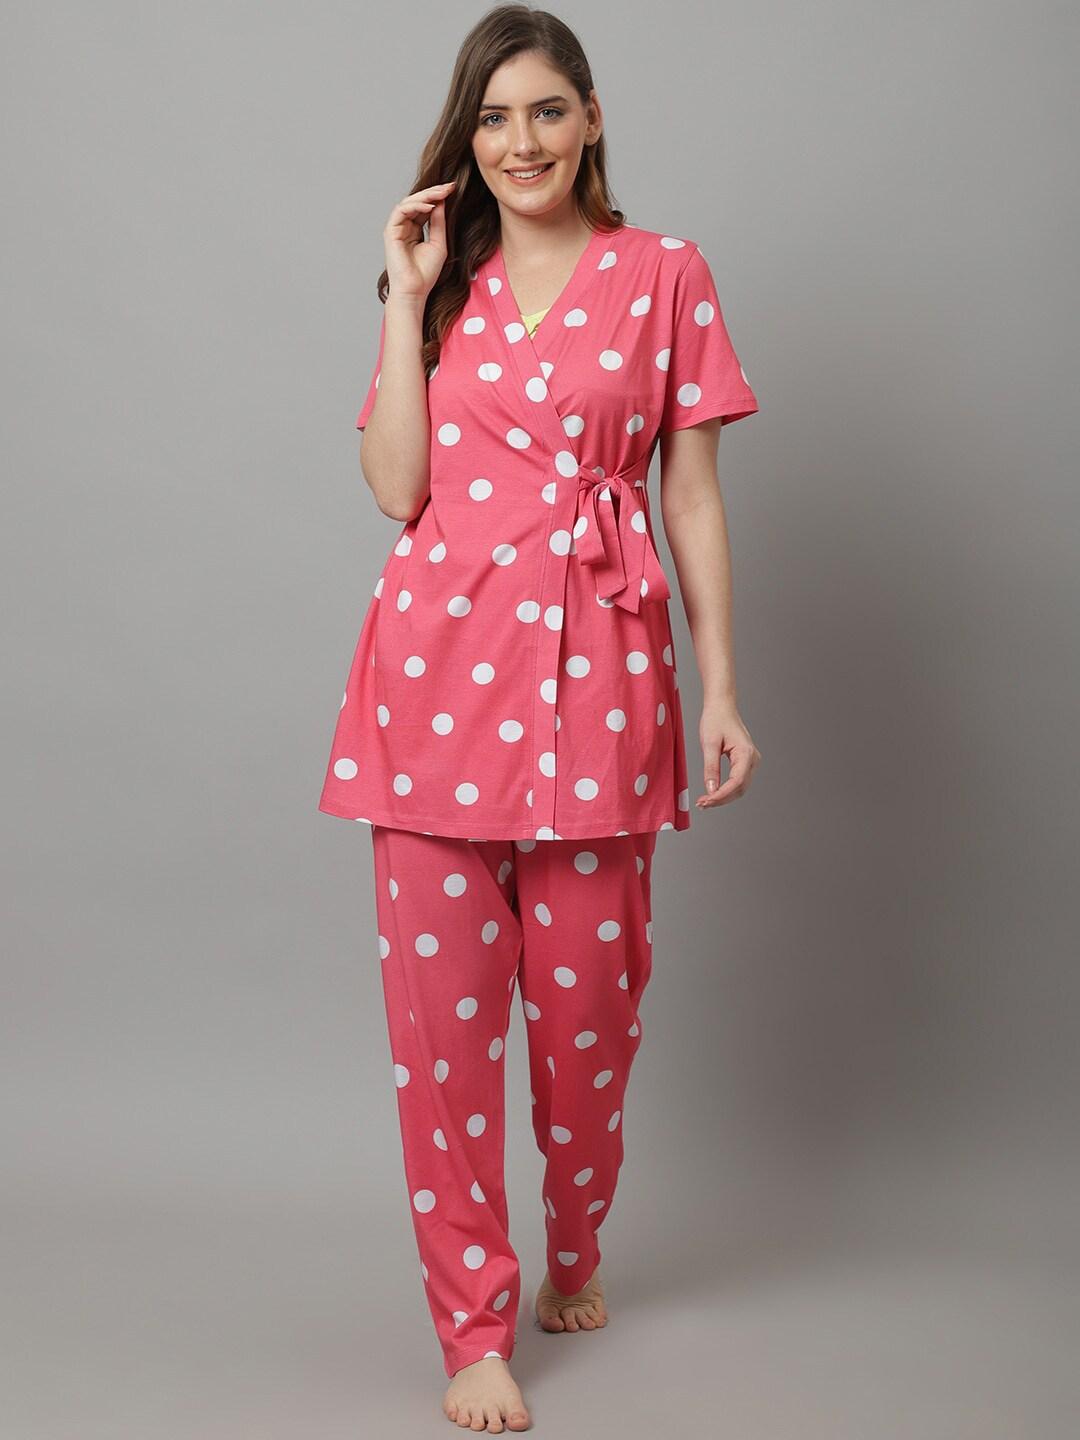 Kanvin 3 Piece Polka Dots Printed Night Suit With Robe